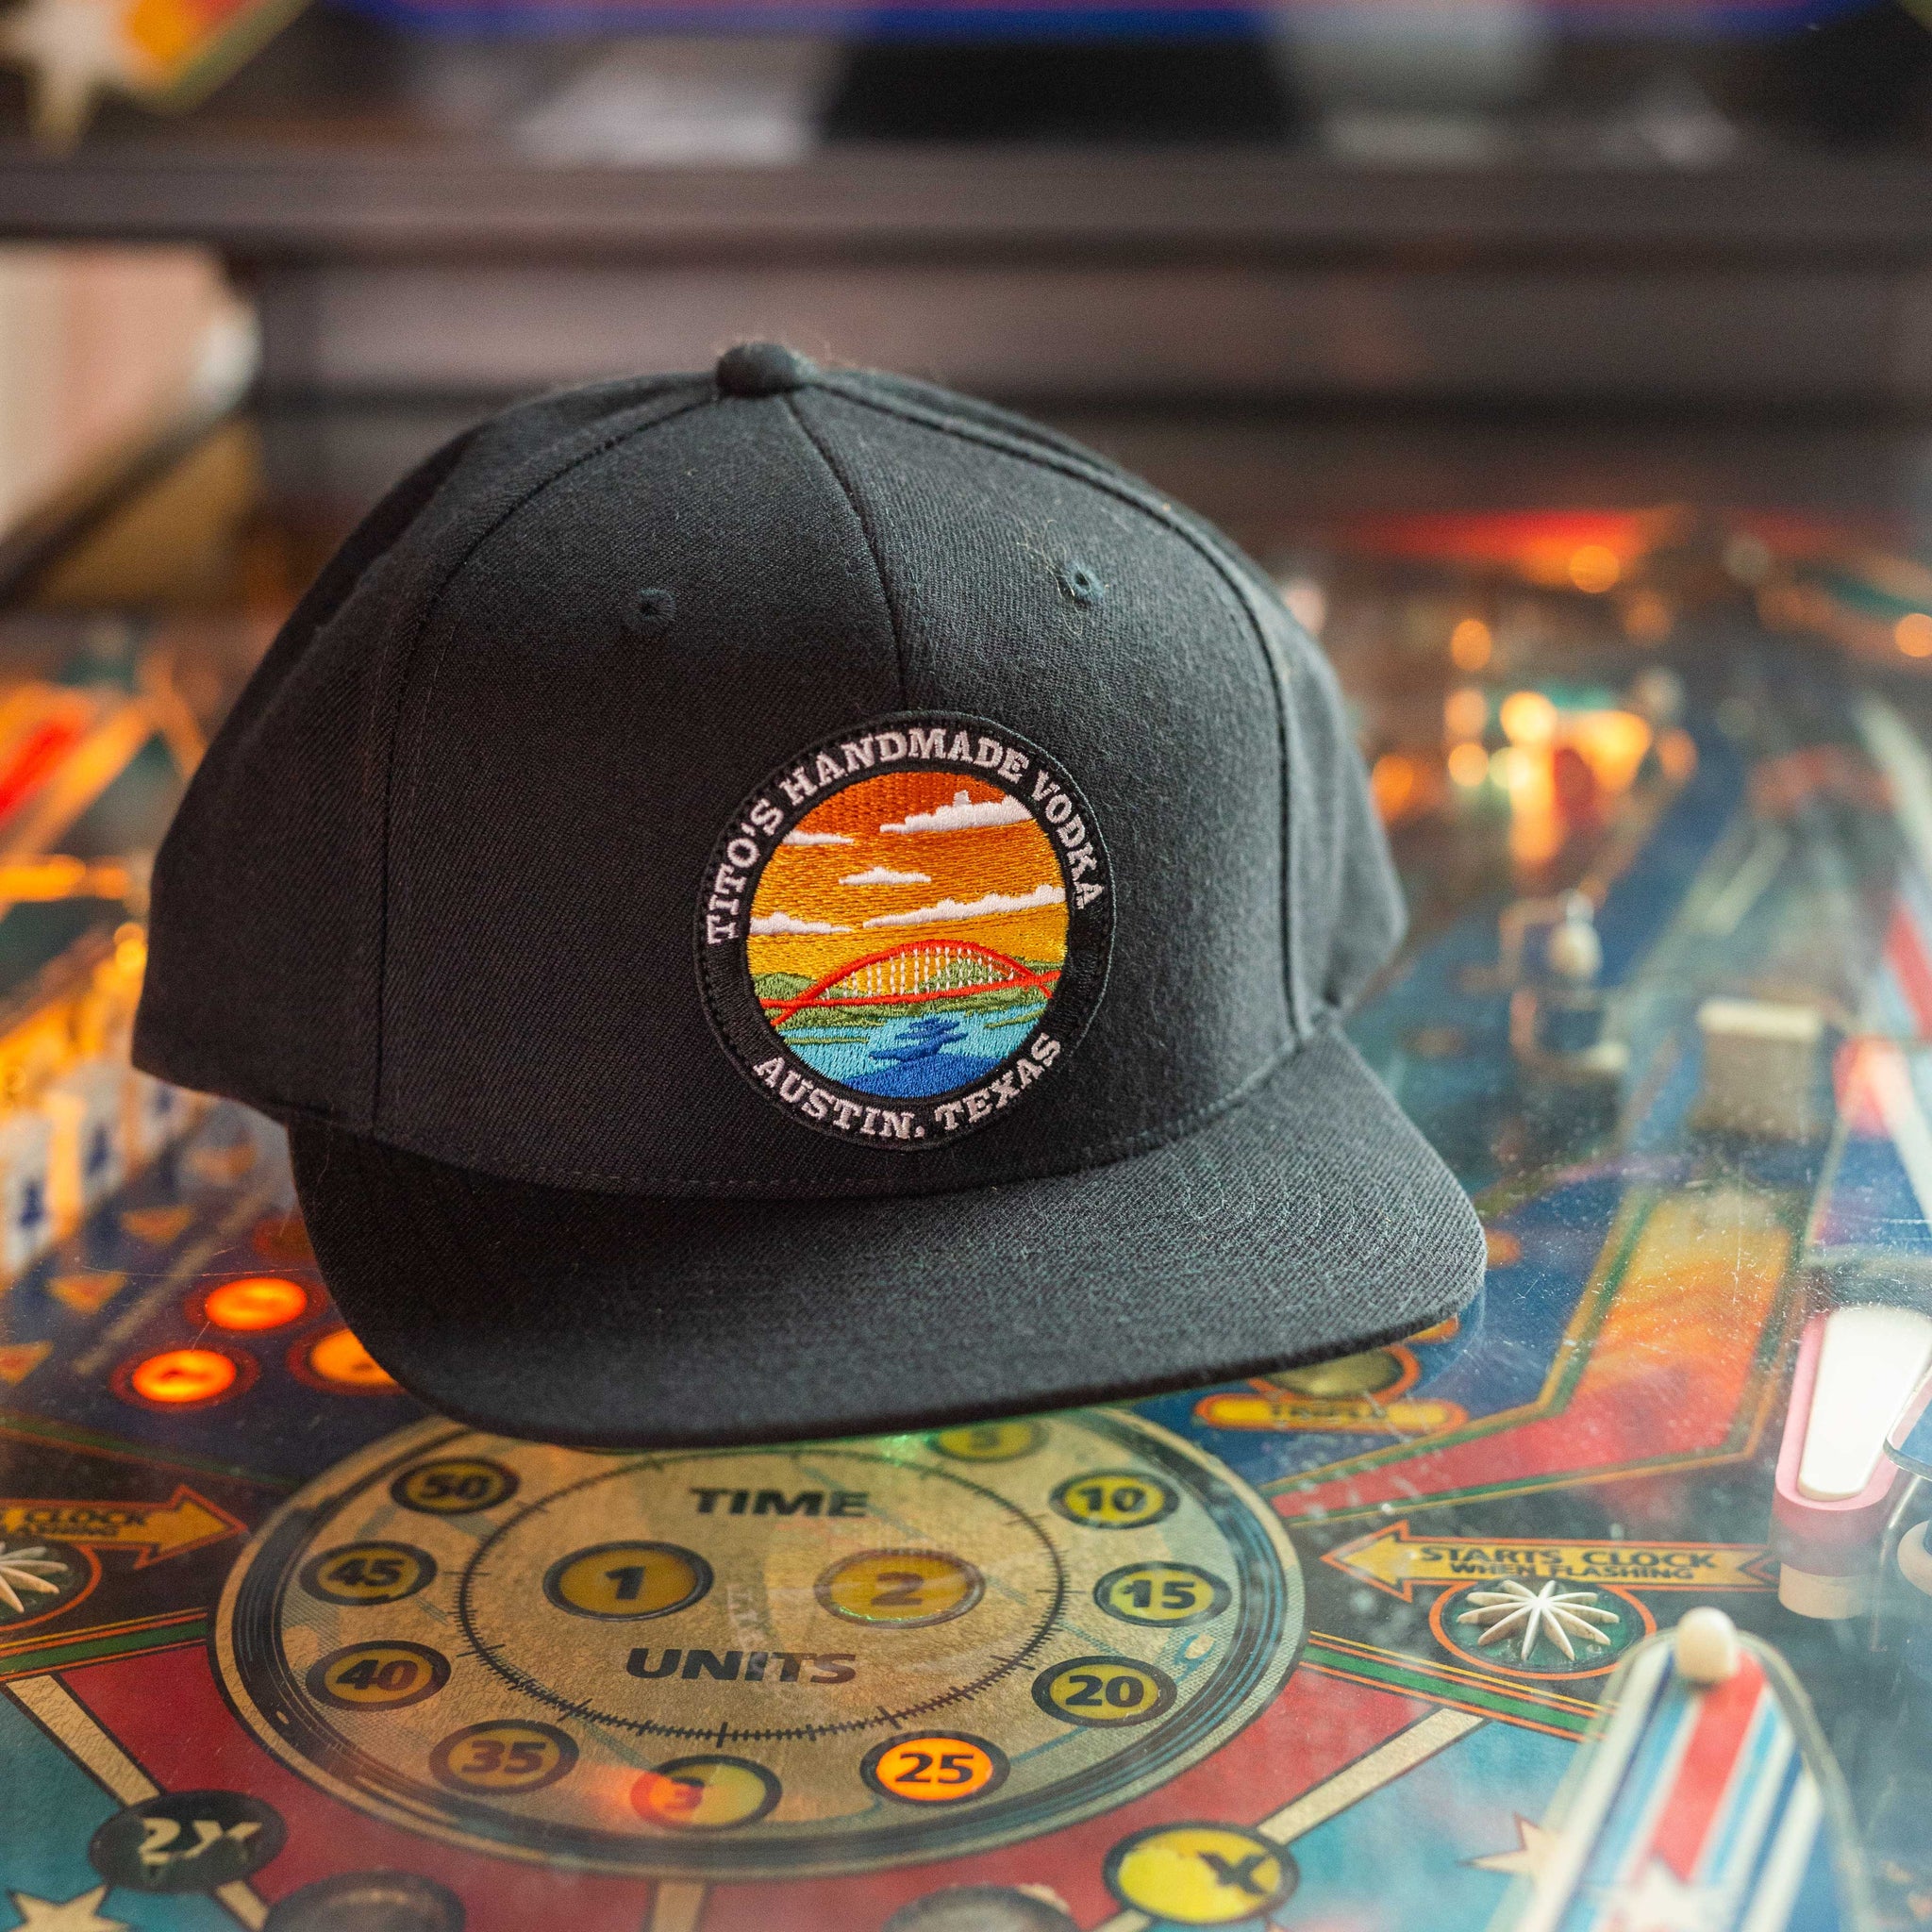 Tito's Hometown Hat sitting on an arcade game